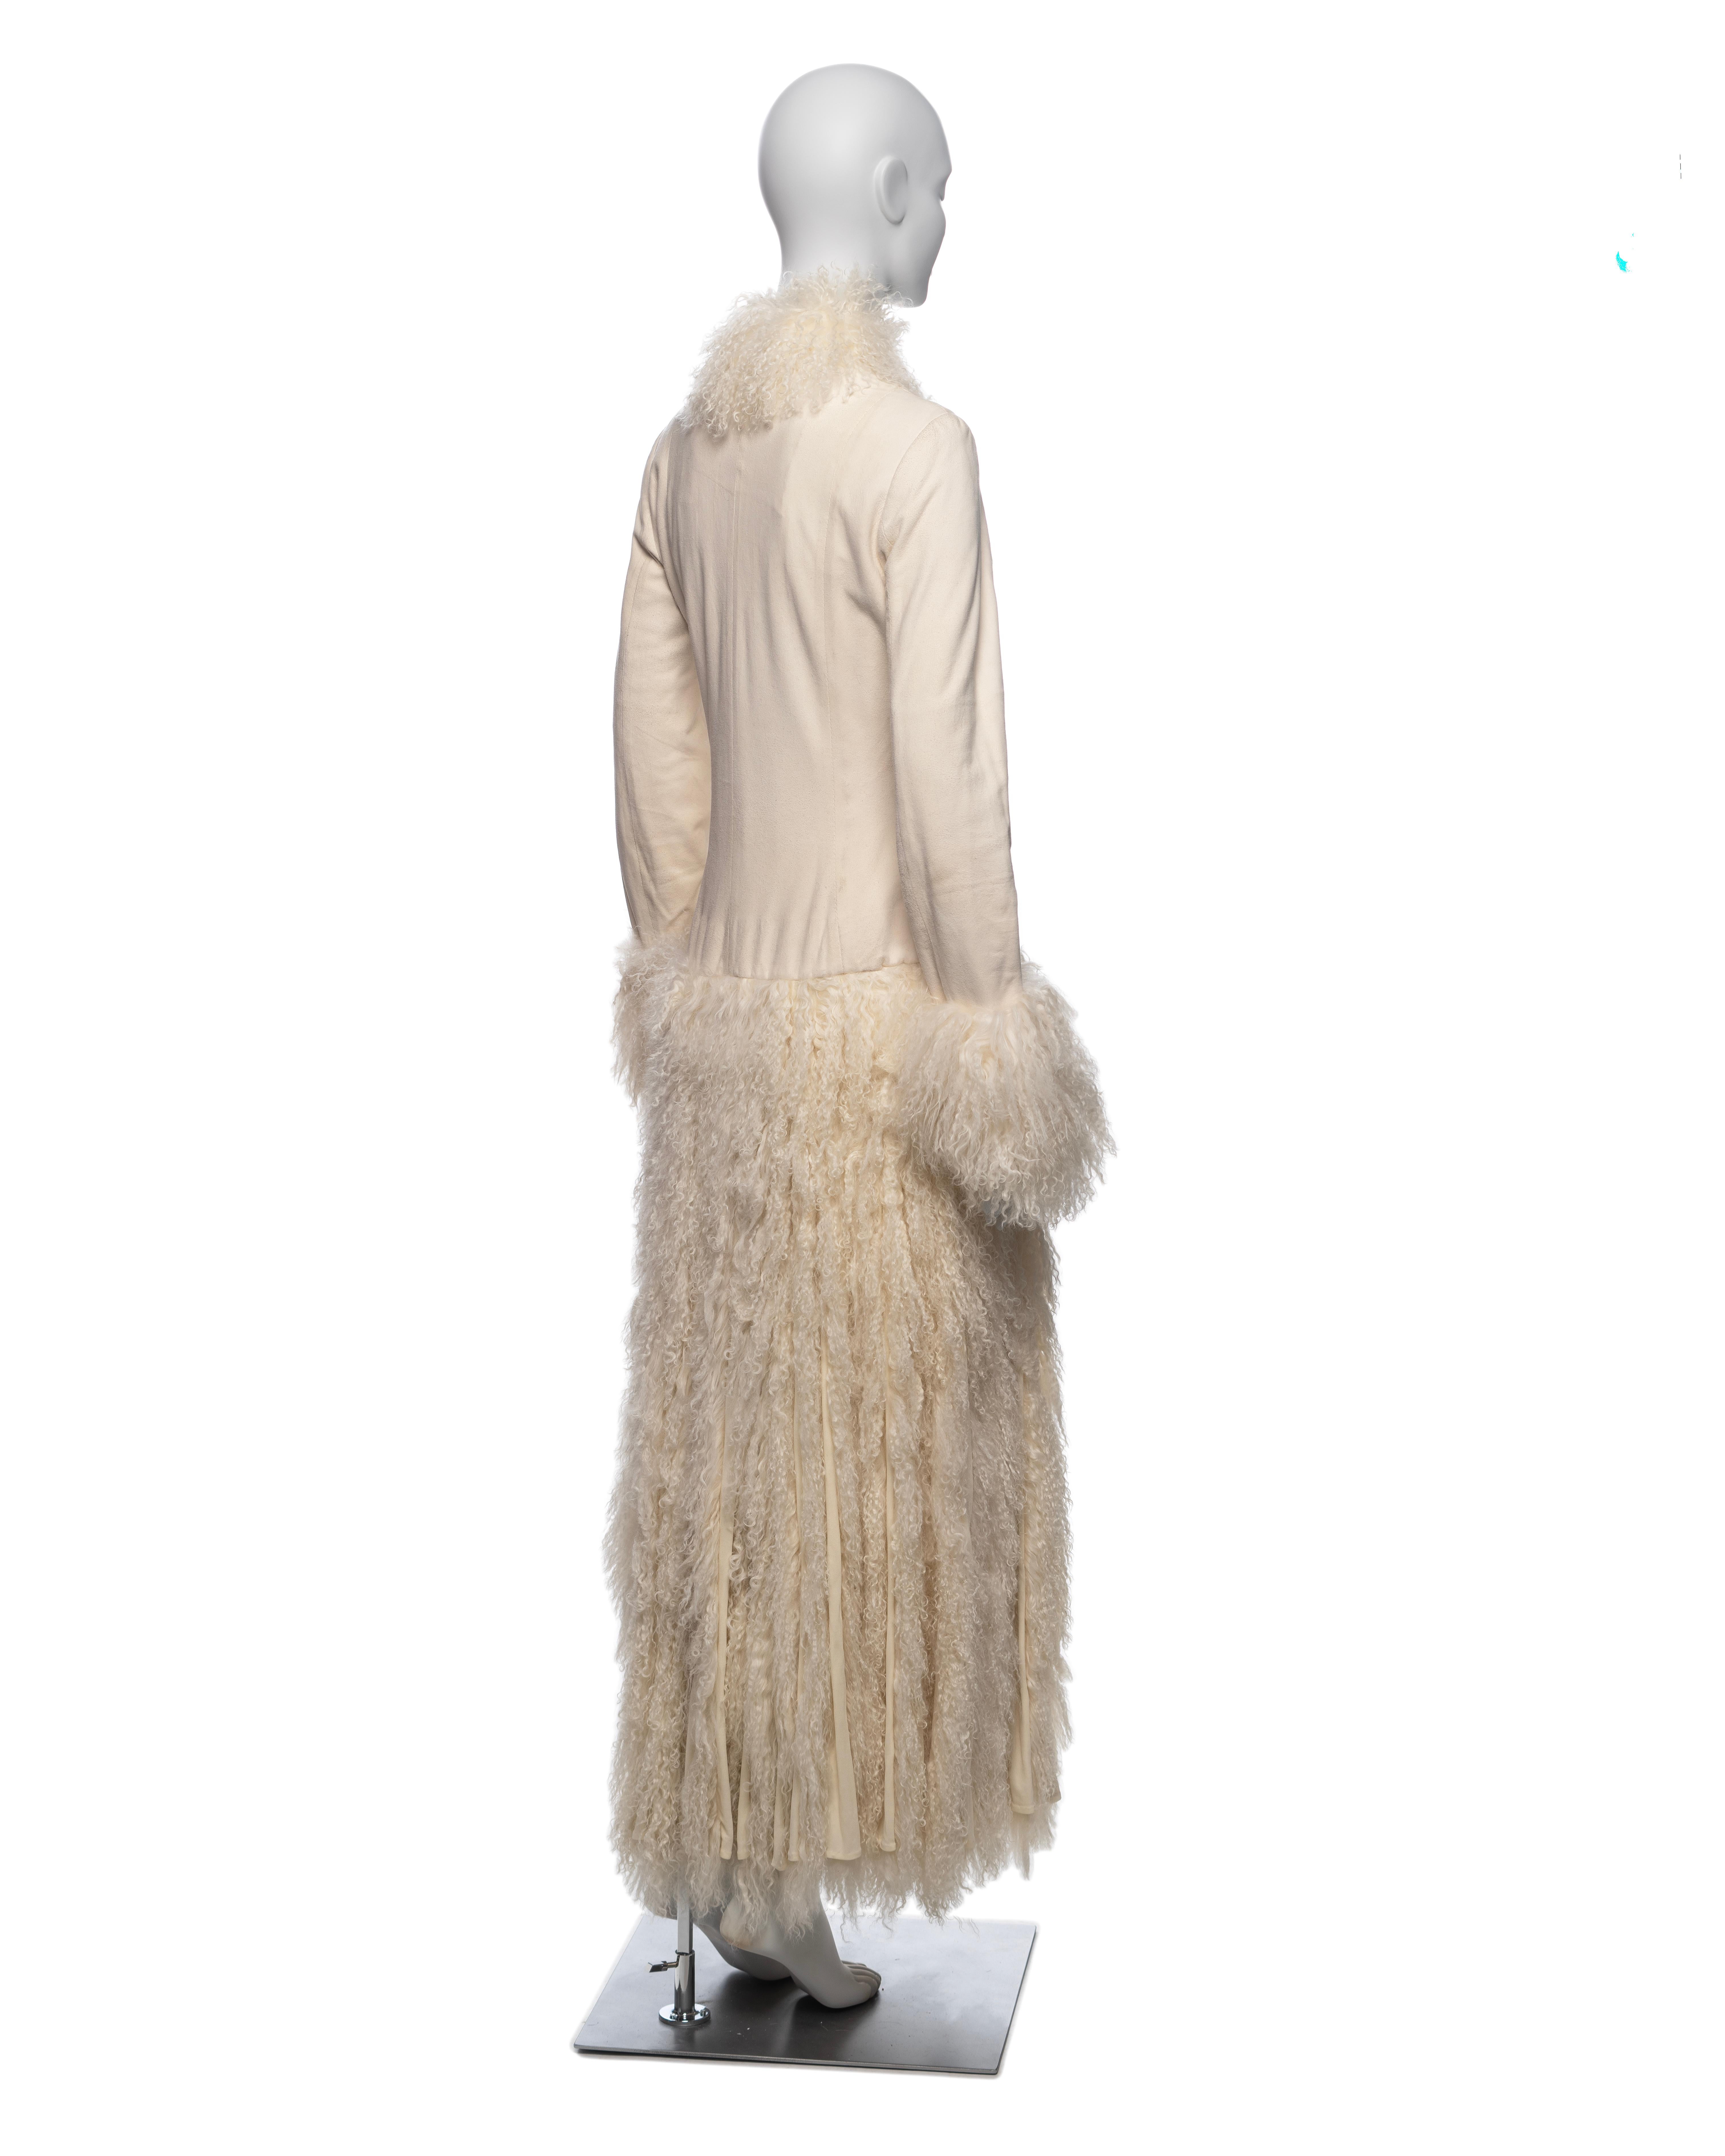 Jean Paul Gaultier White Mongolian Lamb Fur and Leather Coat Dress, FW 2006 For Sale 6